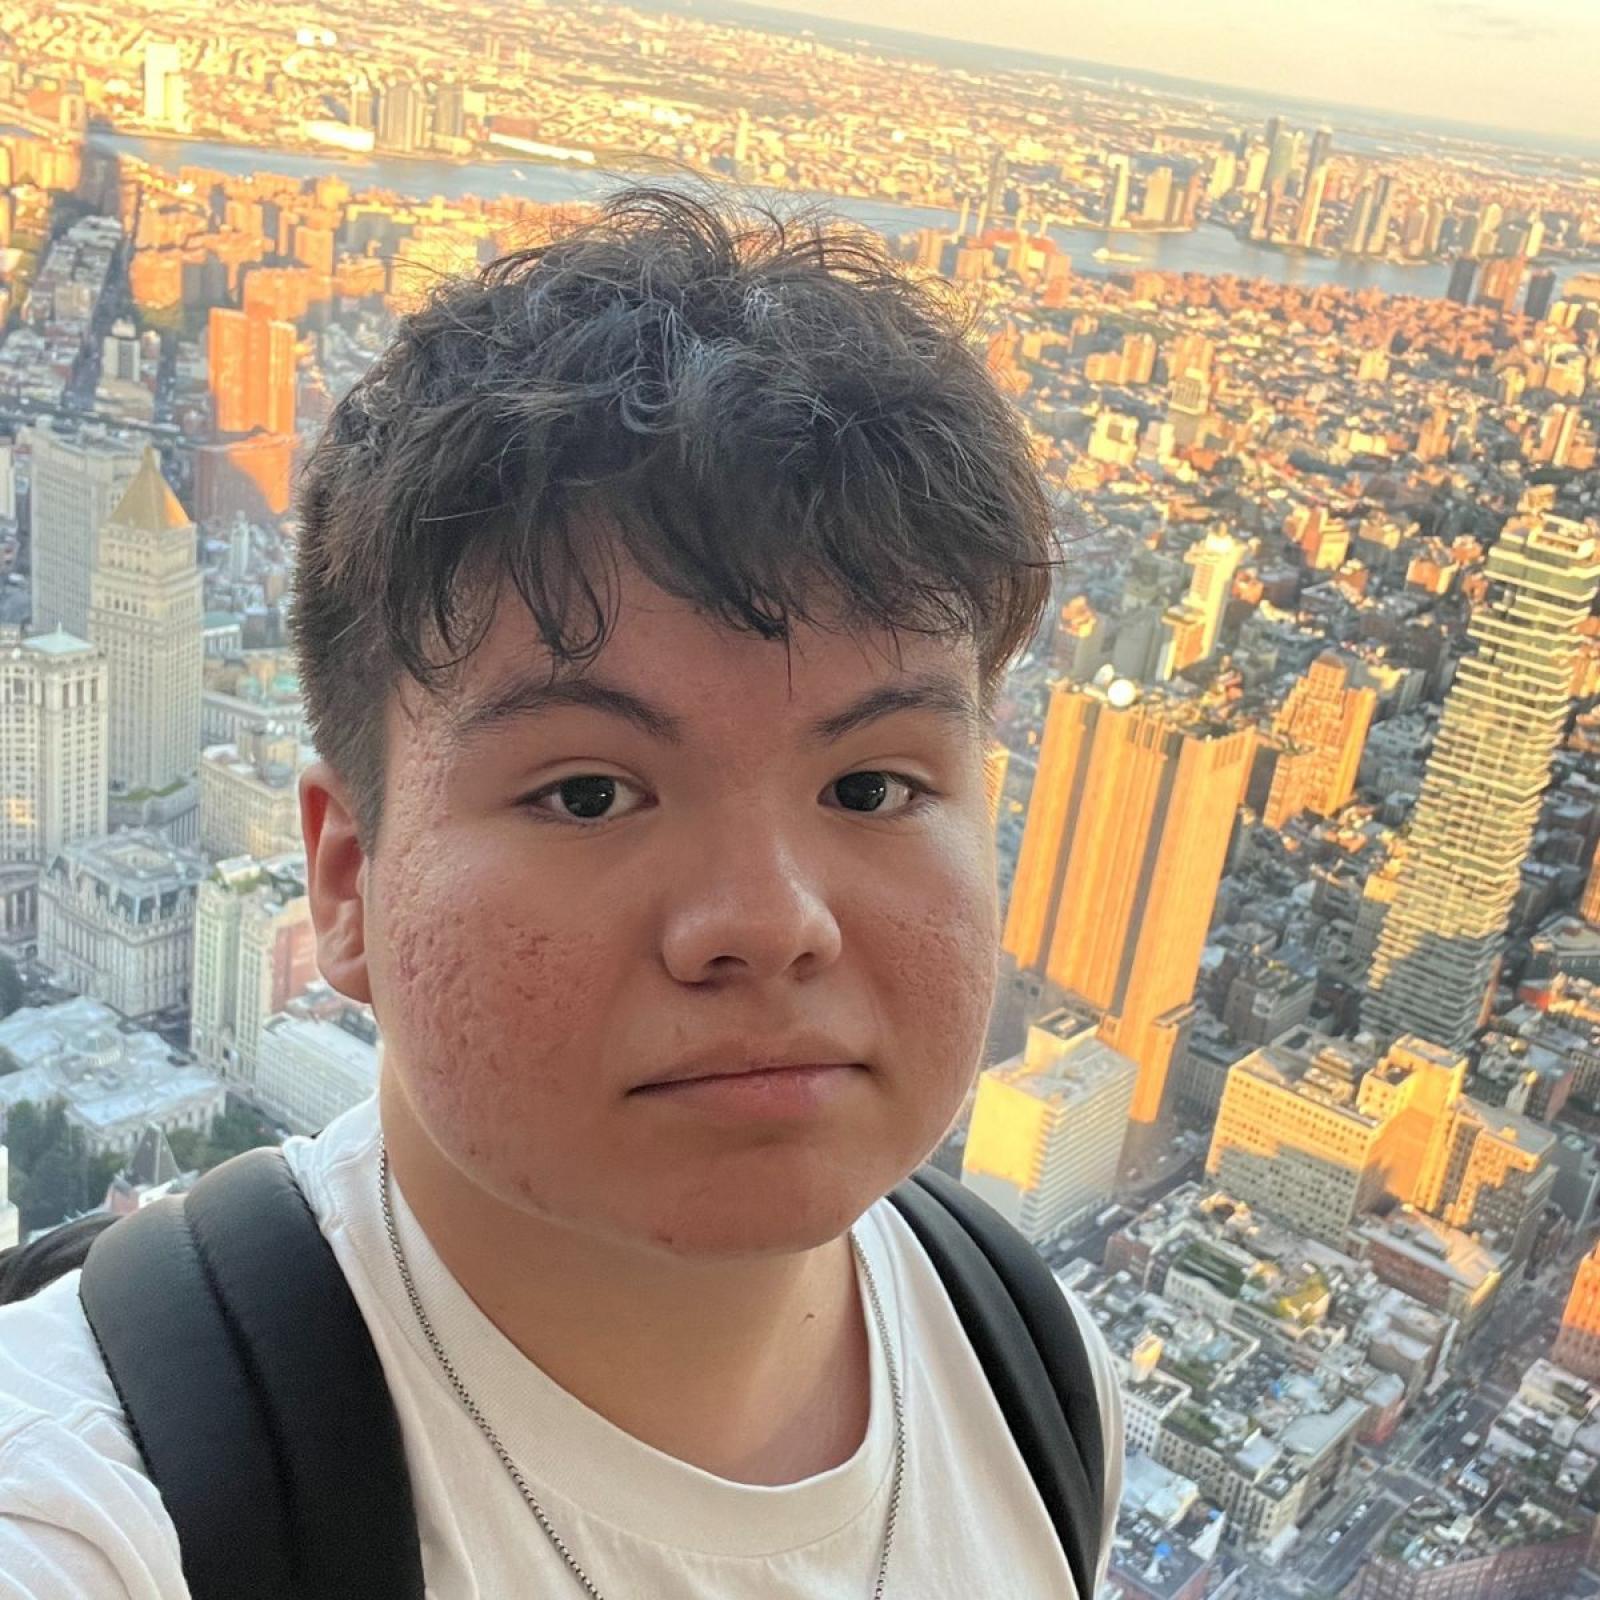 Pace student Daniel Ramos taking a selfie while overlooking the NYC skyline at sunset.